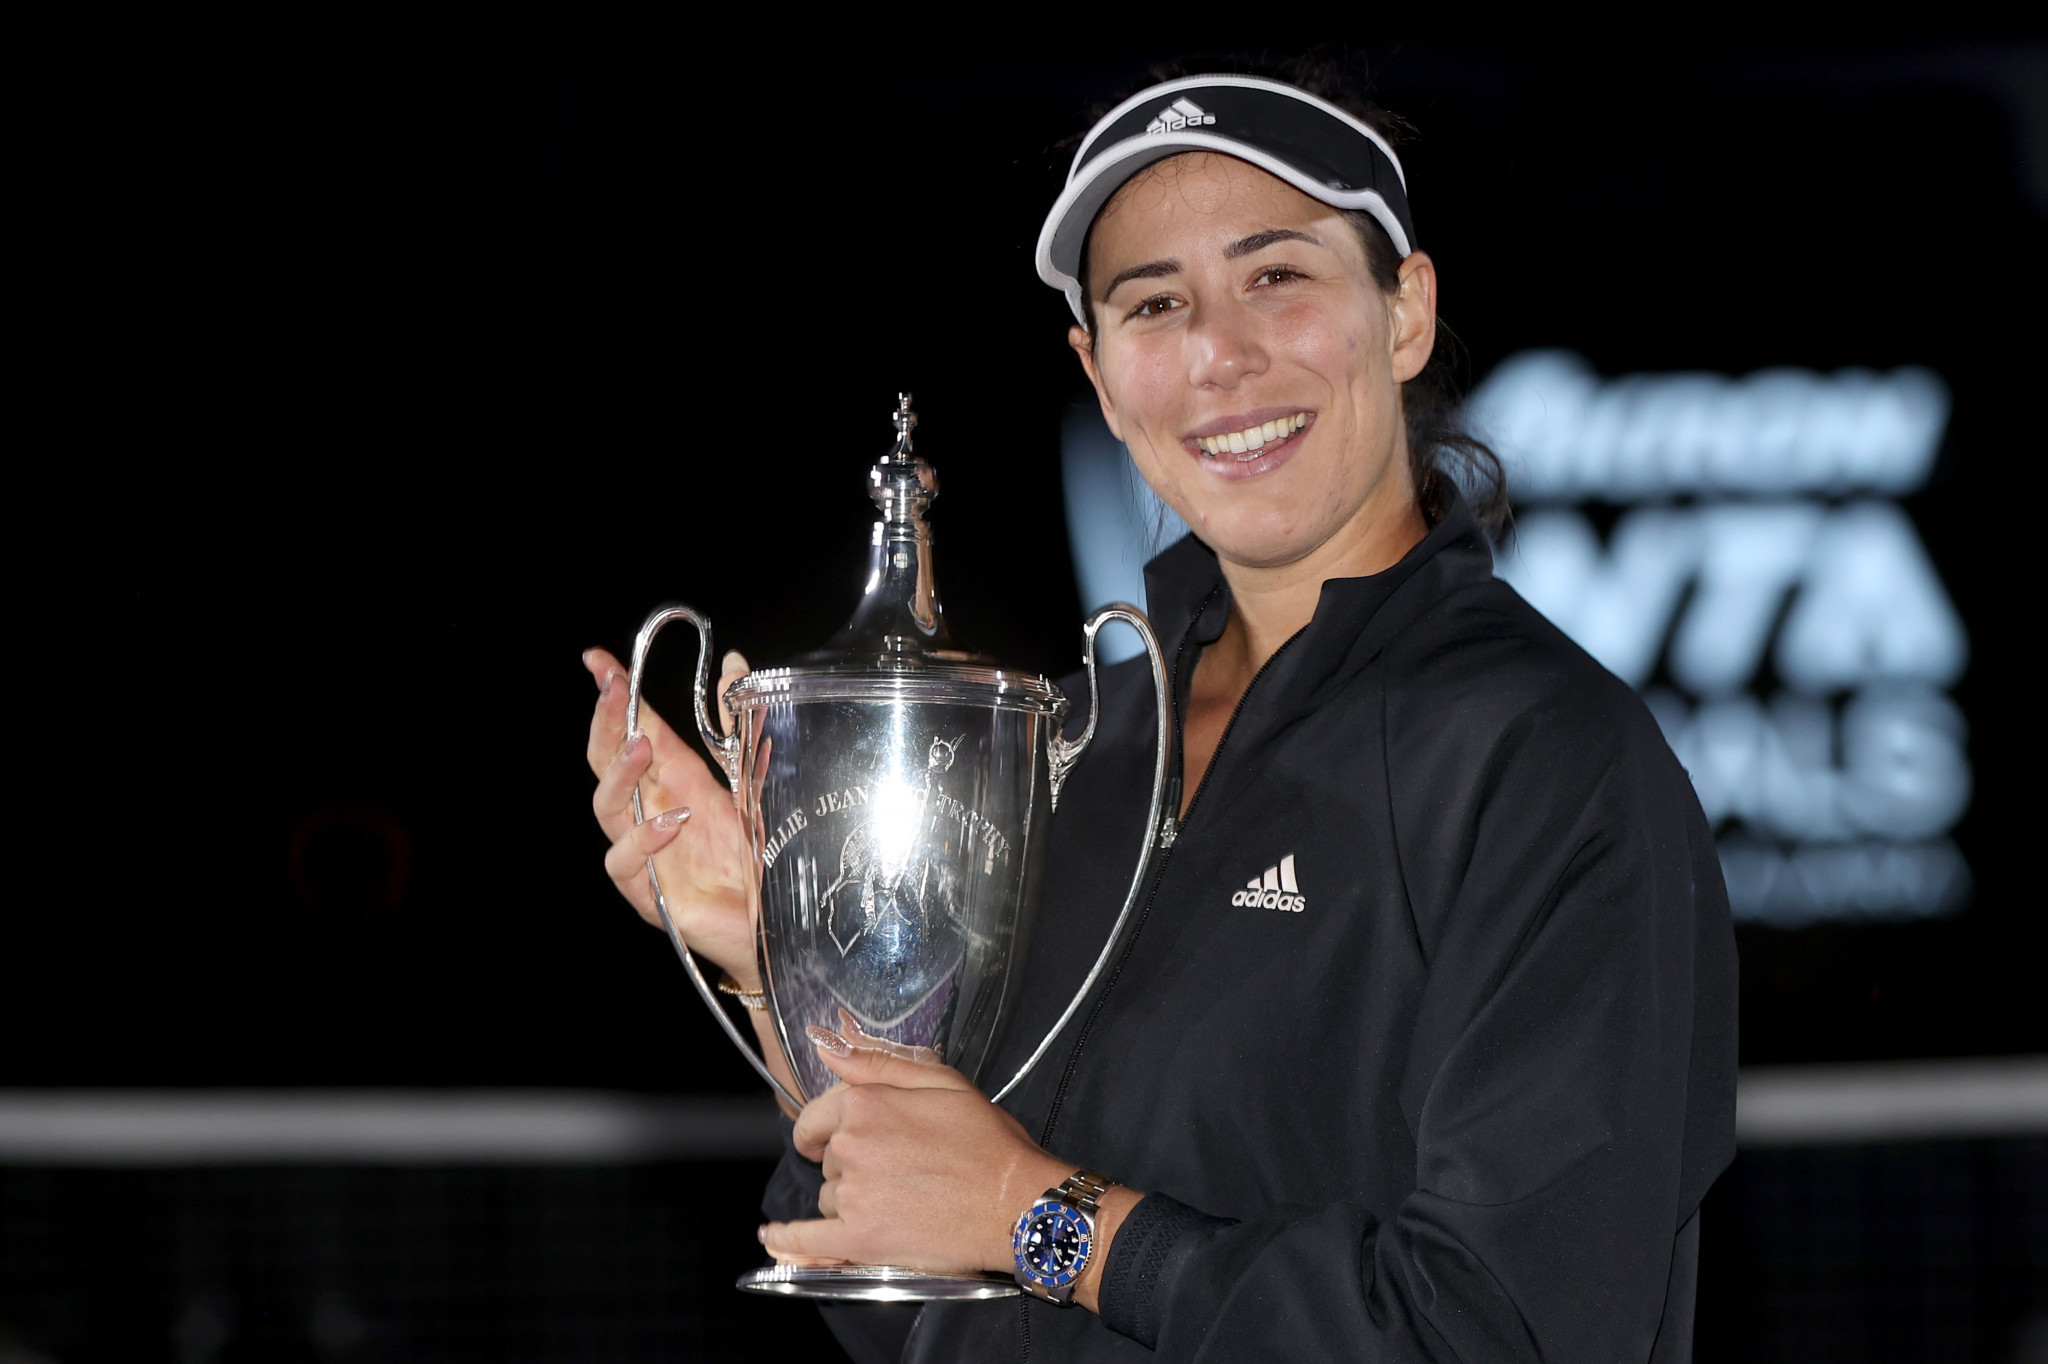 Garbiñe Muguruza has added the WTA Finals to a résumé which includes two Grand Slam victories  ©Getty Images